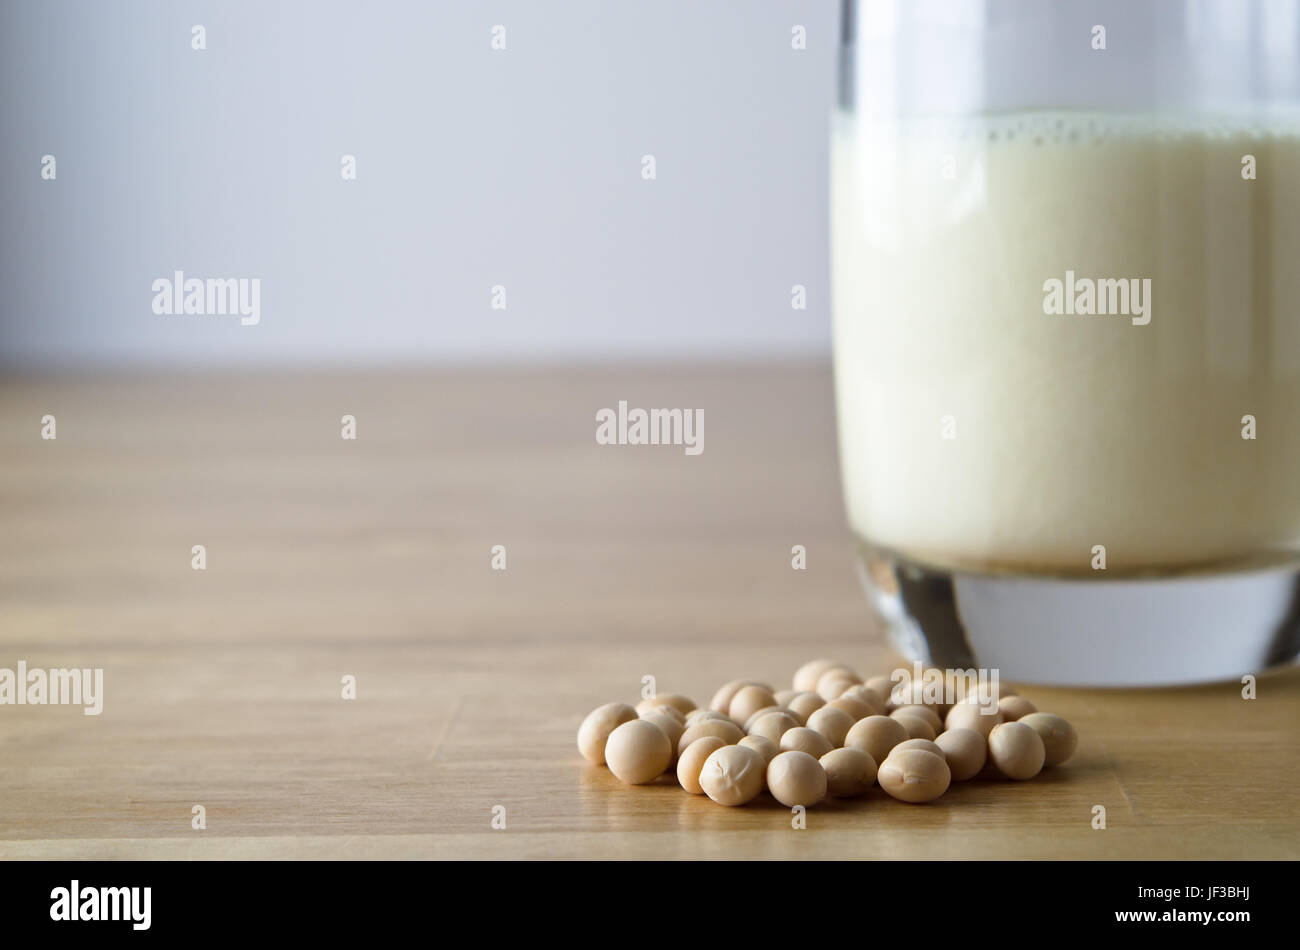 Dry soya (soy) beans with glass of soya milk in soft focus background on a light wooden table.  Horizontal (landscape) orientation. Stock Photo